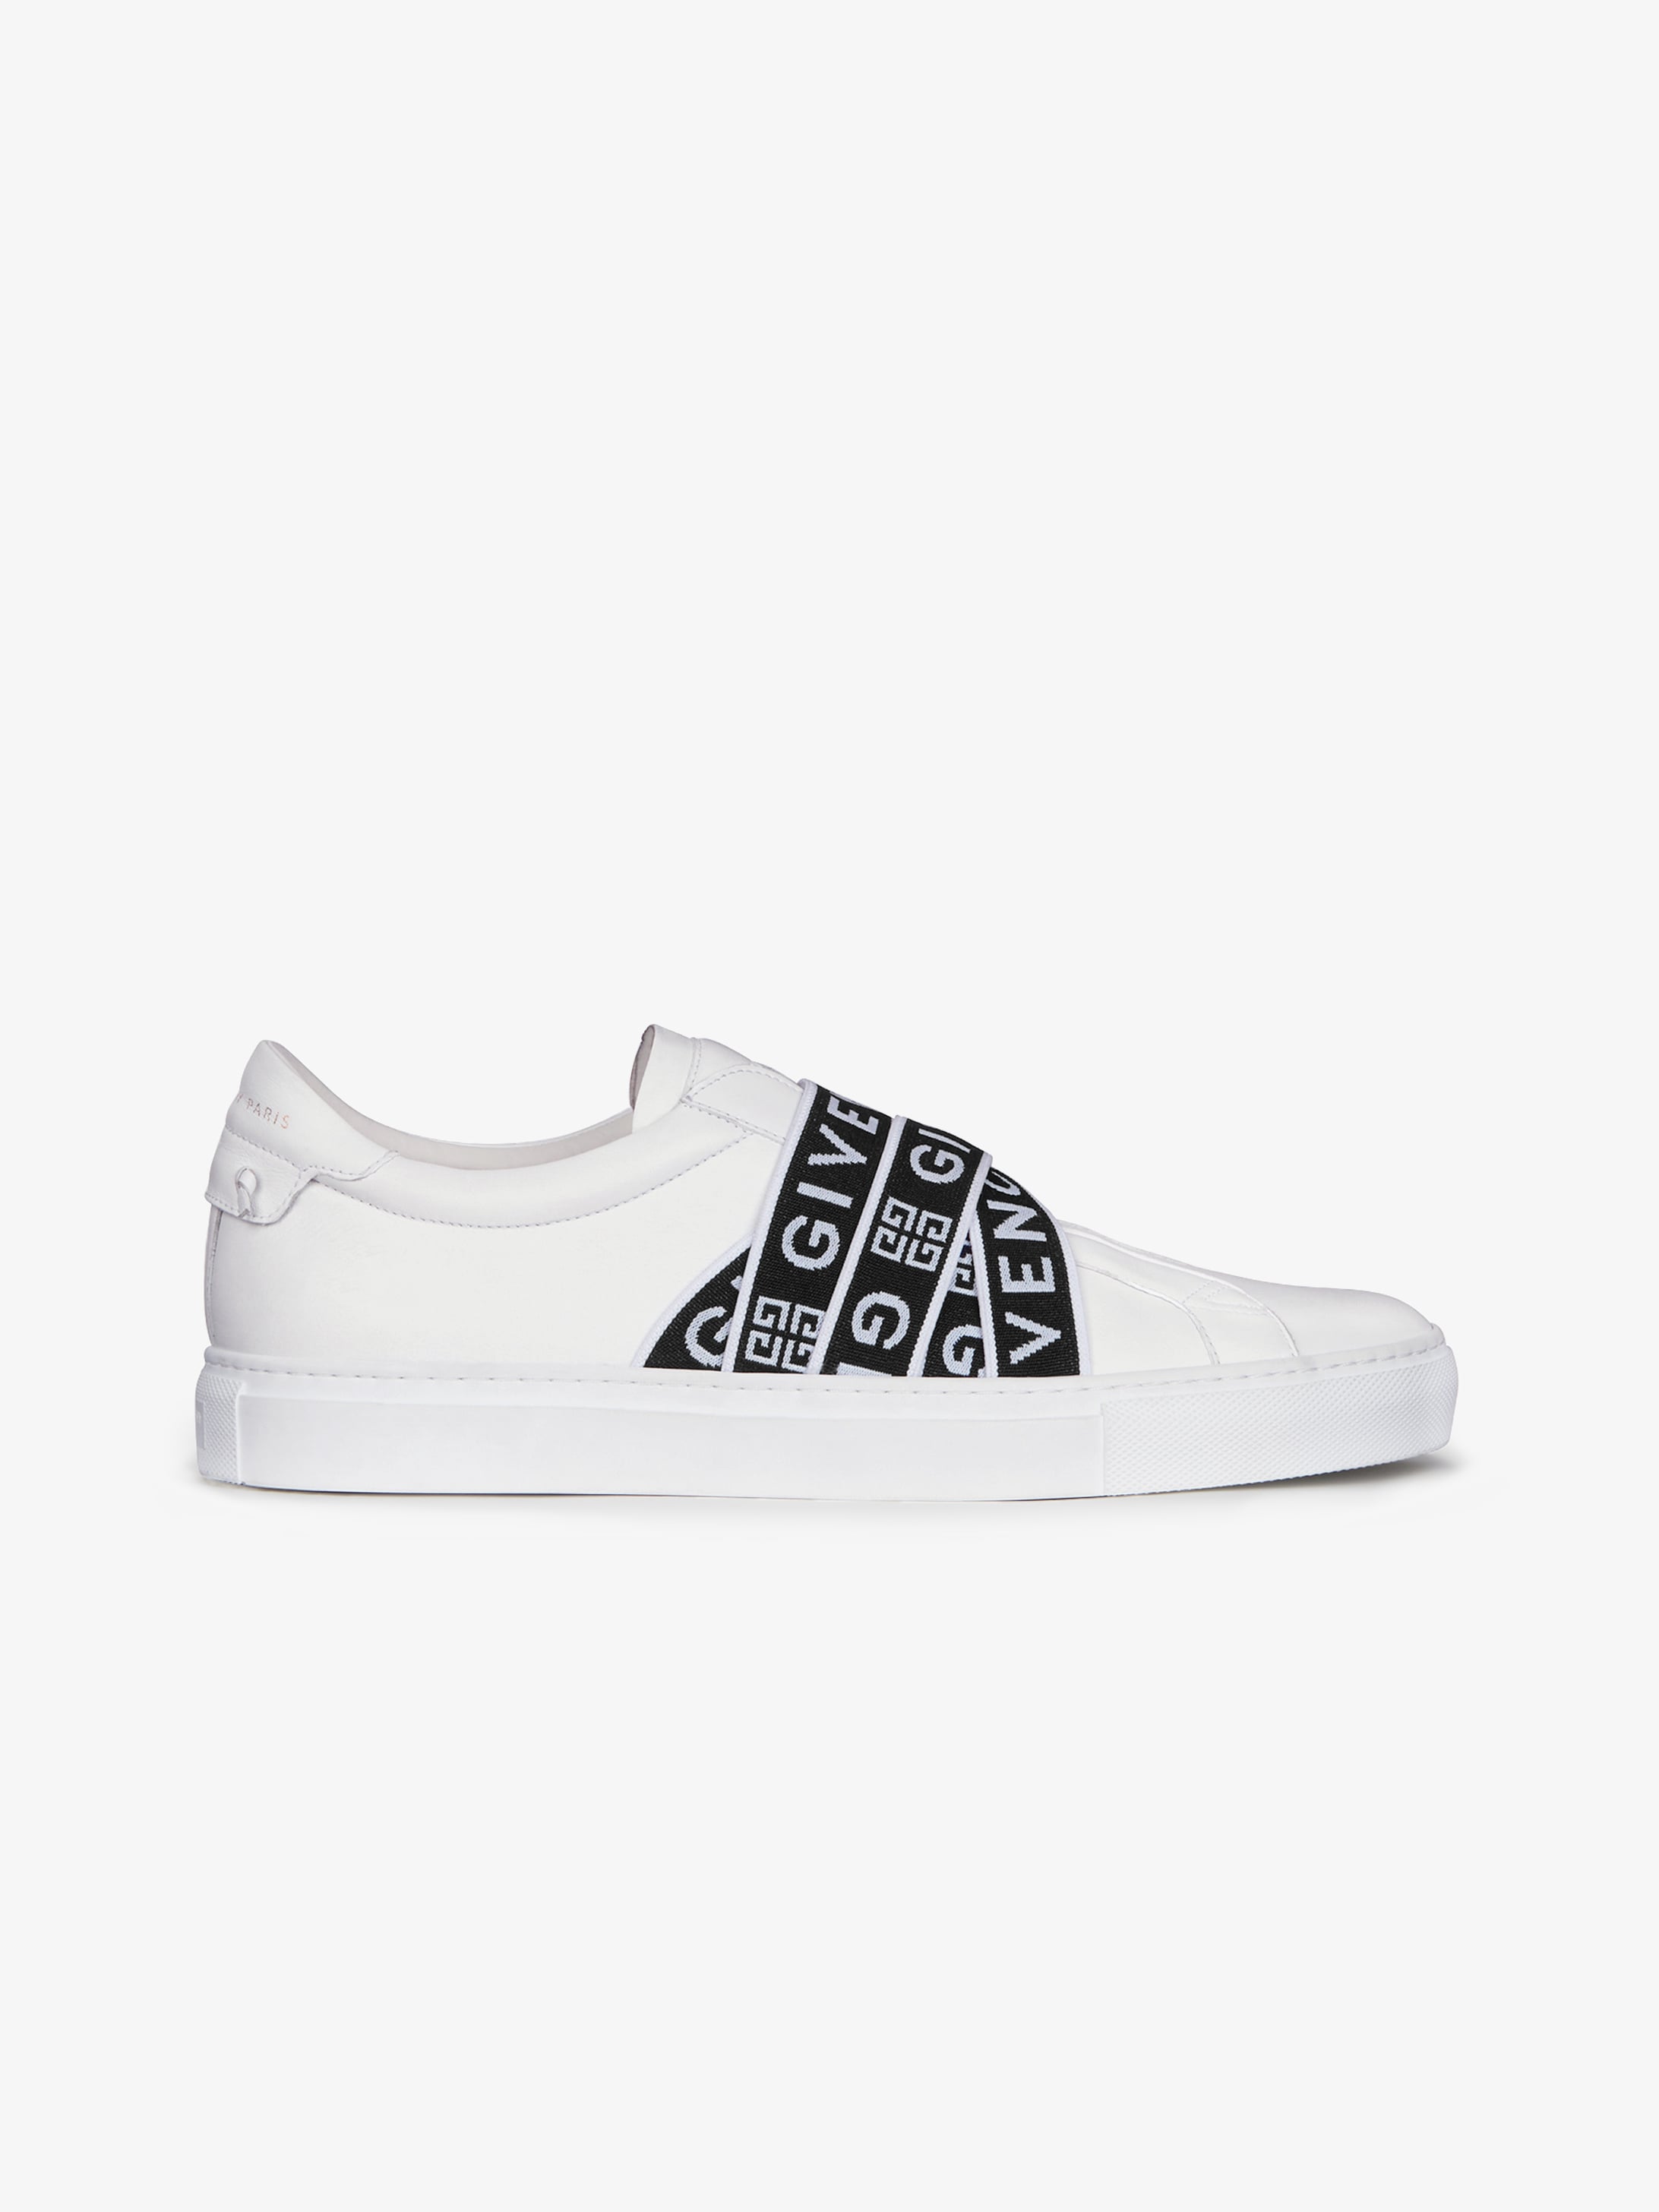 givenchy black and white sneakers 